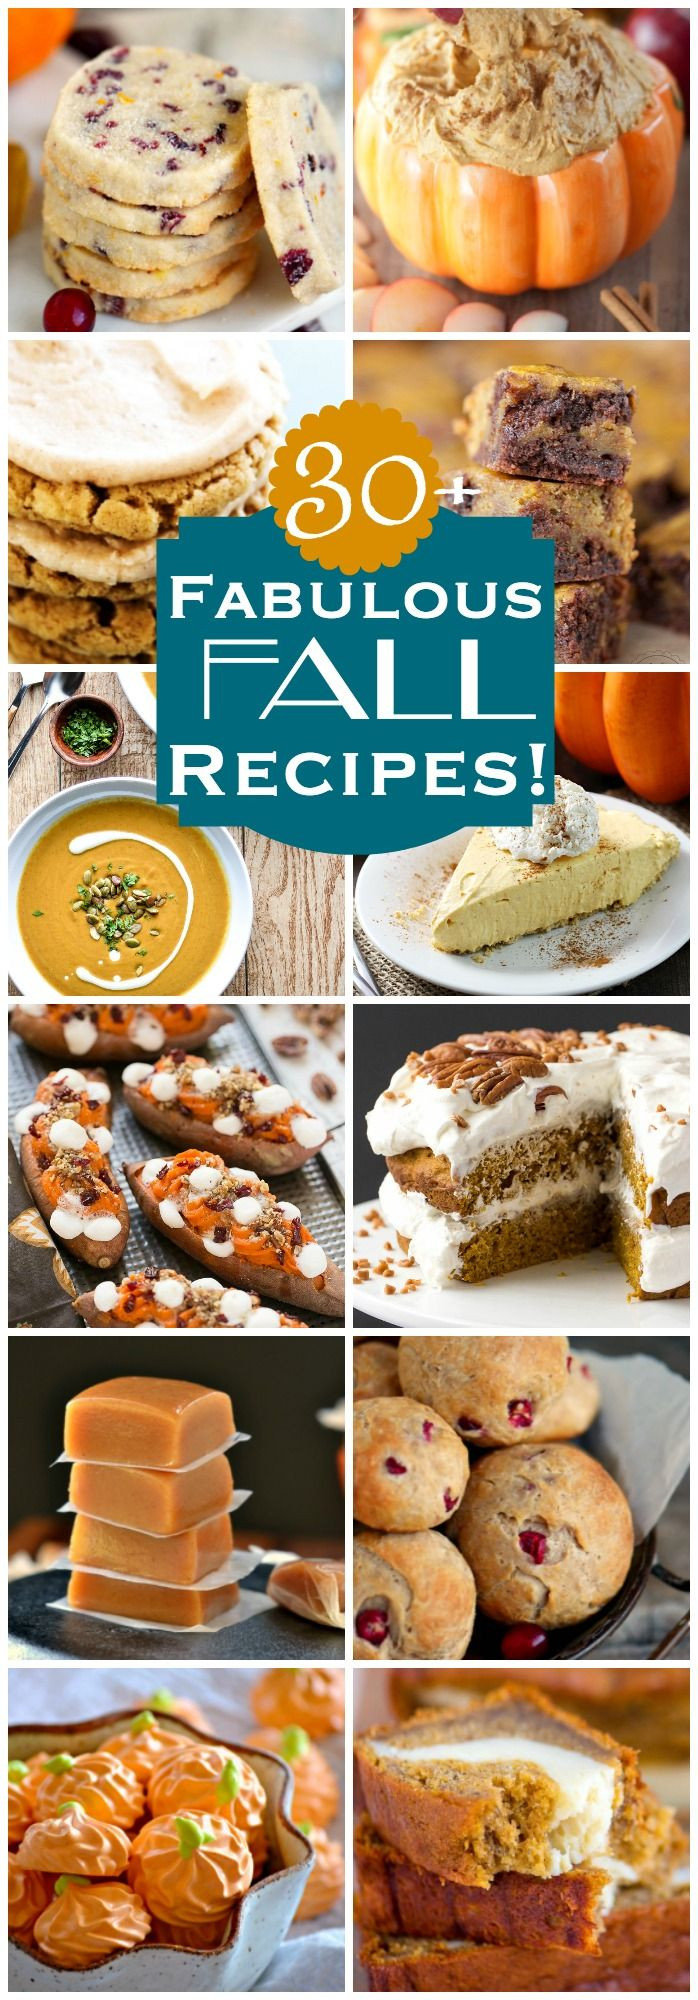 Fall Breakfast Recipes
 17 Best images about Seasons Fall on Pinterest